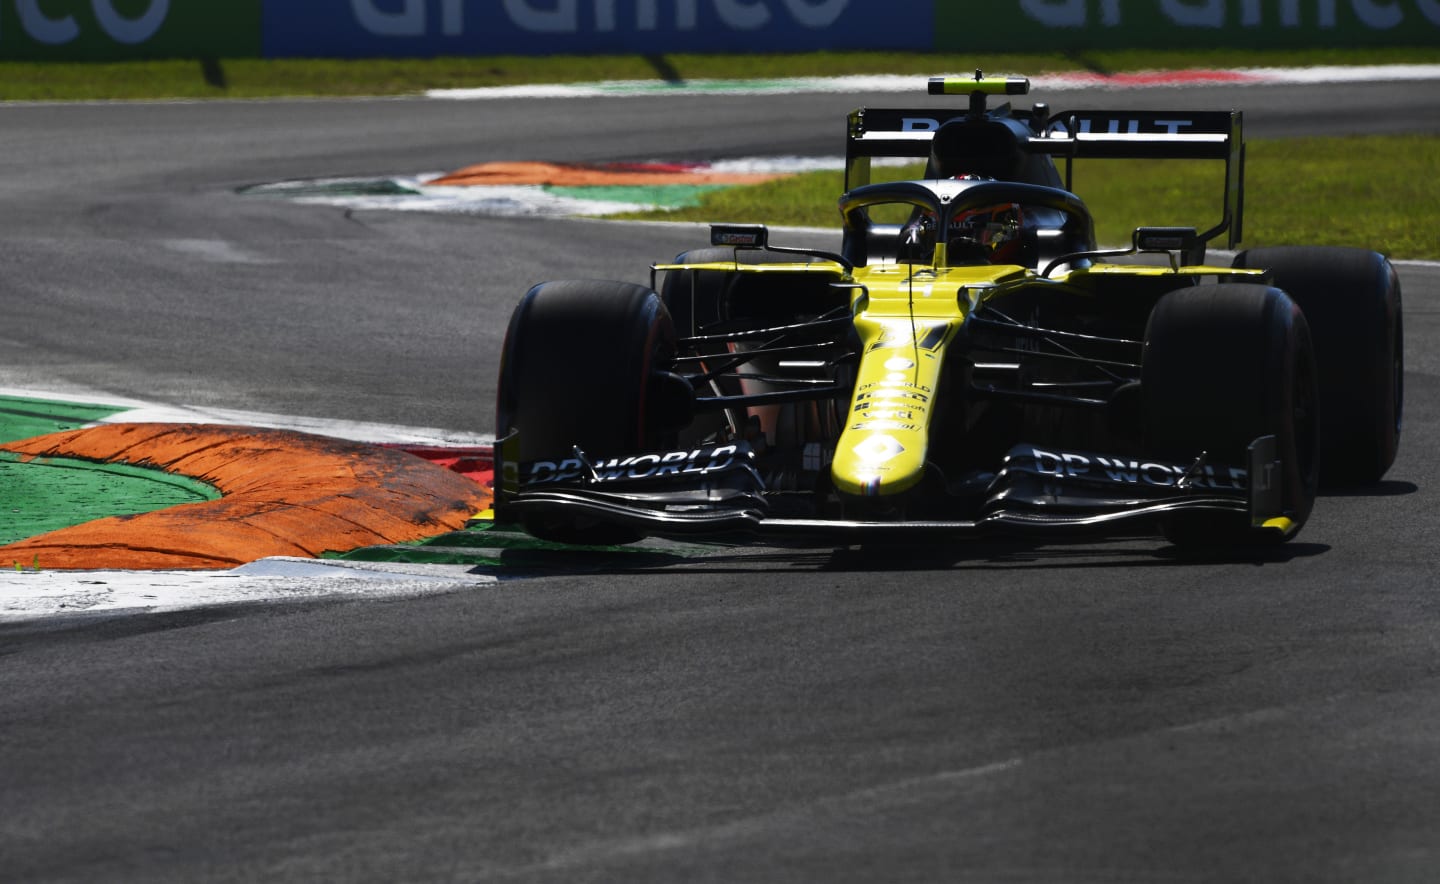 MONZA, ITALY - SEPTEMBER 05: Esteban Ocon of France driving the (31) Renault Sport Formula One Team RS20 on track during qualifying for the F1 Grand Prix of Italy at Autodromo di Monza on September 05, 2020 in Monza, Italy. (Photo by Rudy Carezzevoli/Getty Images)